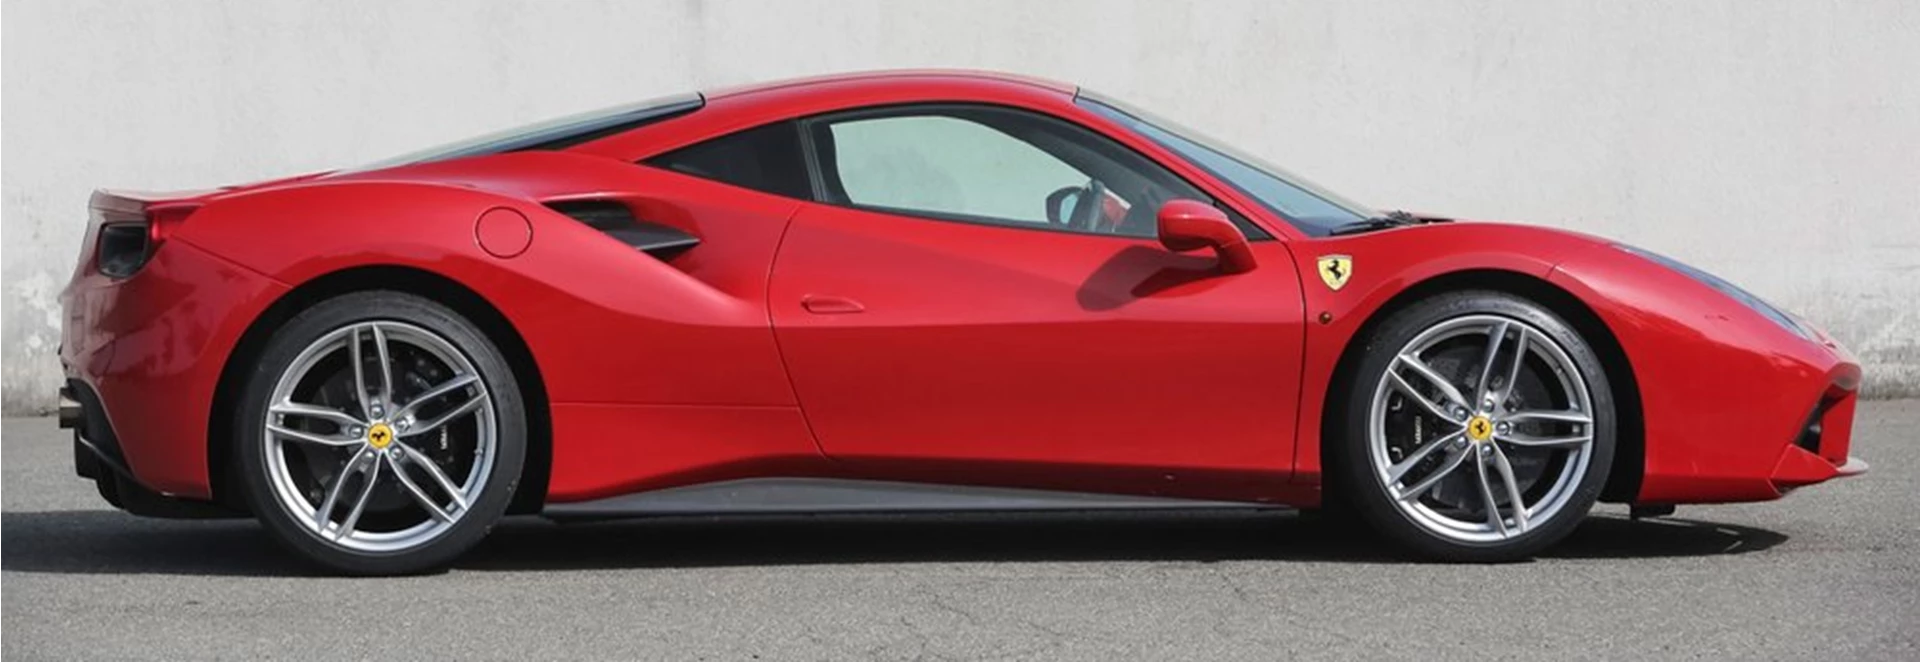 Want to buy a Ferrari? It’s not as simple as just having the money…